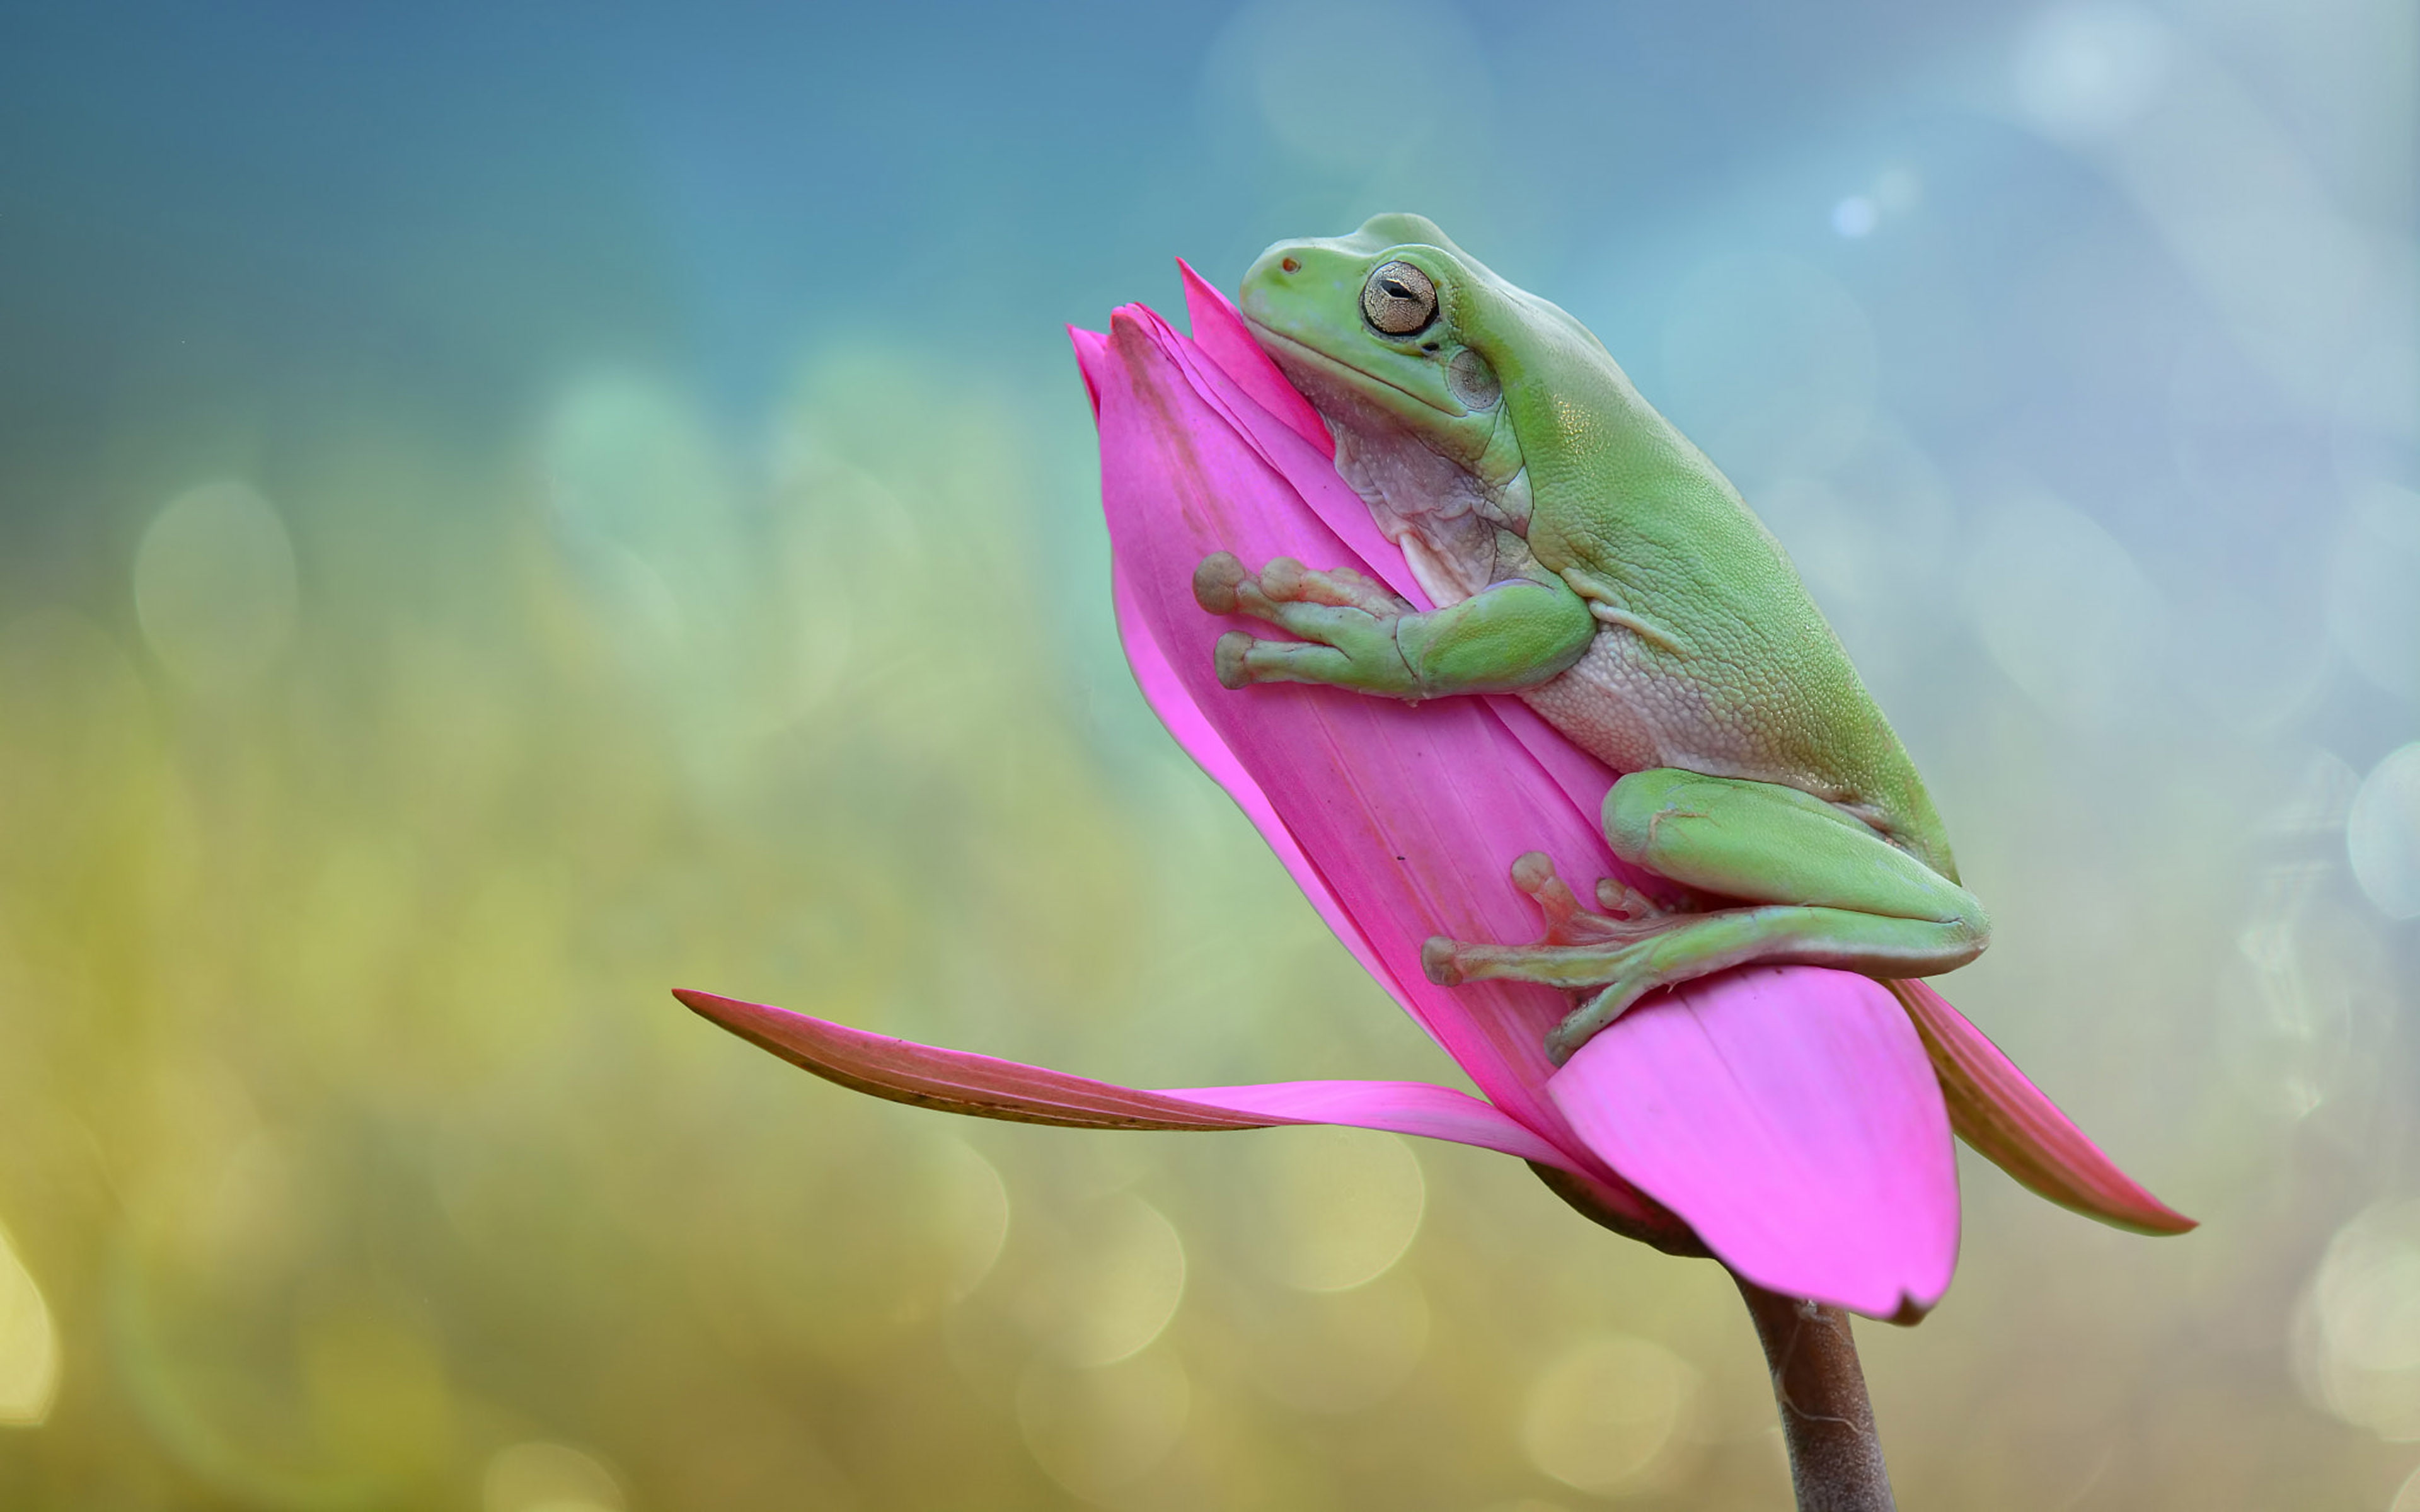 Green Frog On Bud Of A Pink Rose 4k Wallpapers Hd Images For Desktop And Mobile 3840×2400